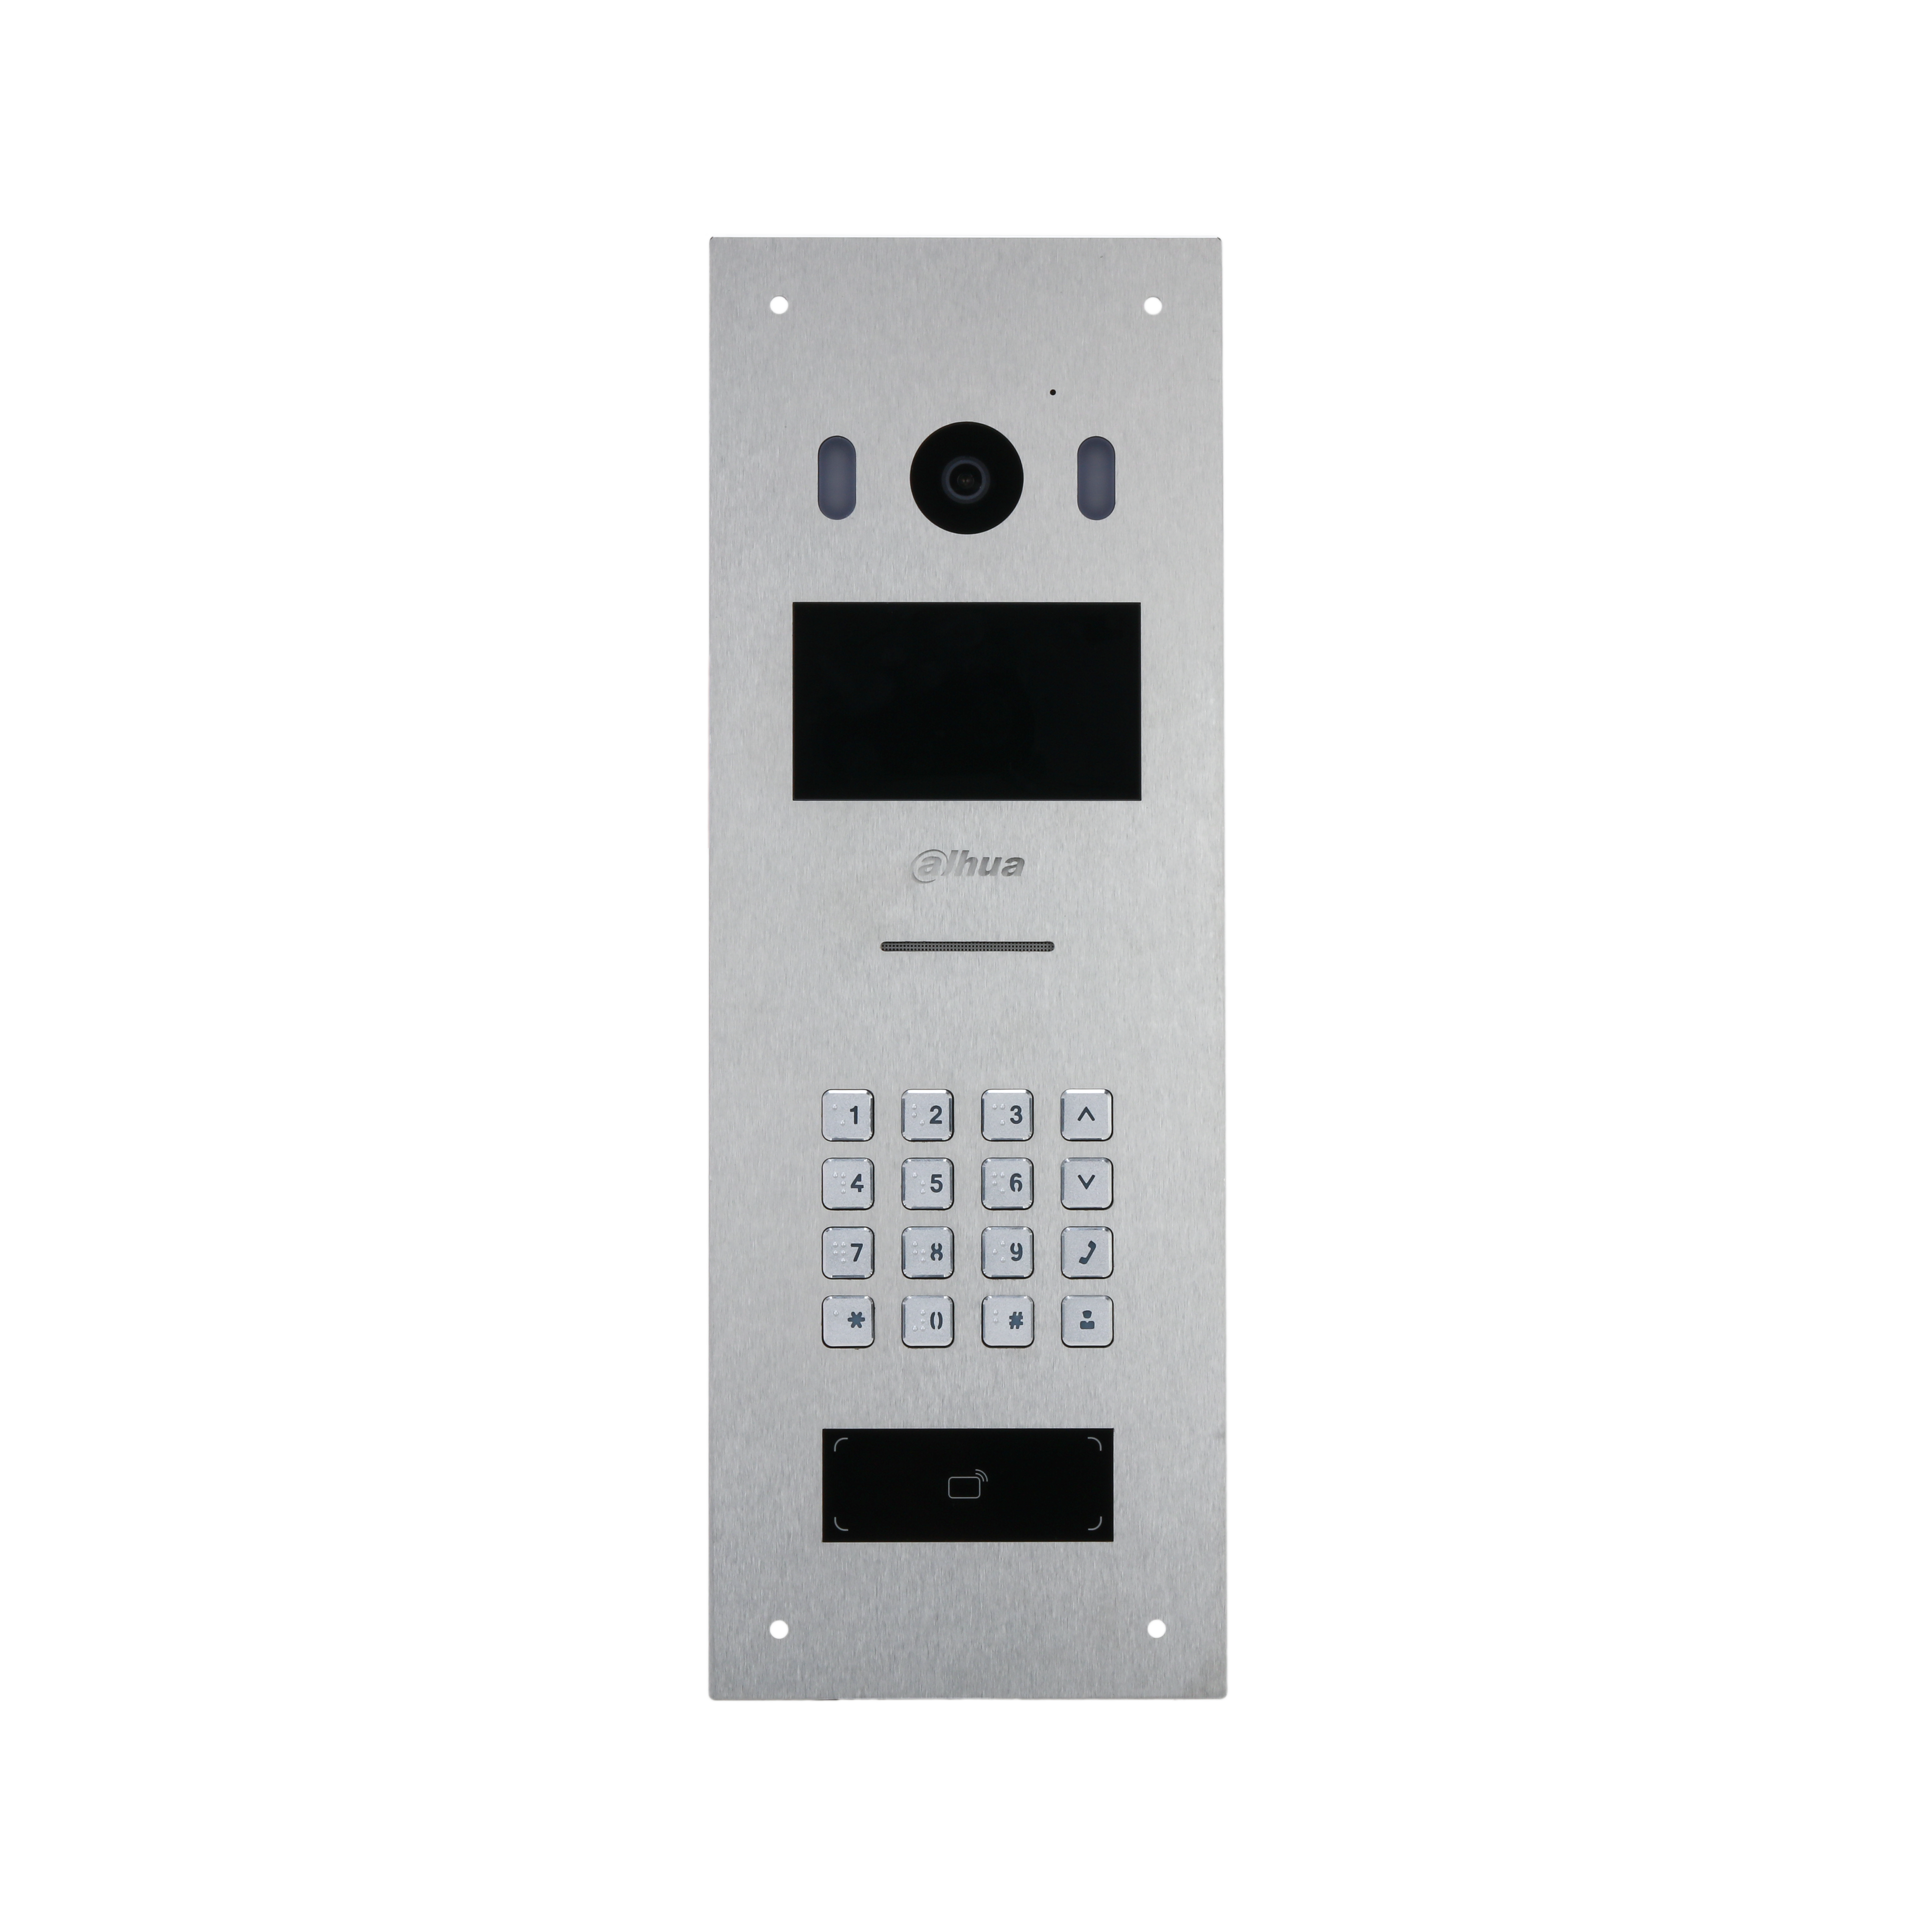 DAHUA SIP2.0 IP INTERCOM KEYPAD & VIDEO DOOR STATION SILVER APARTMENT 4.3 INCH DISPLAY MECHANICAL BUTTON 2MP 86° STAINLESS STEEL 12VDC